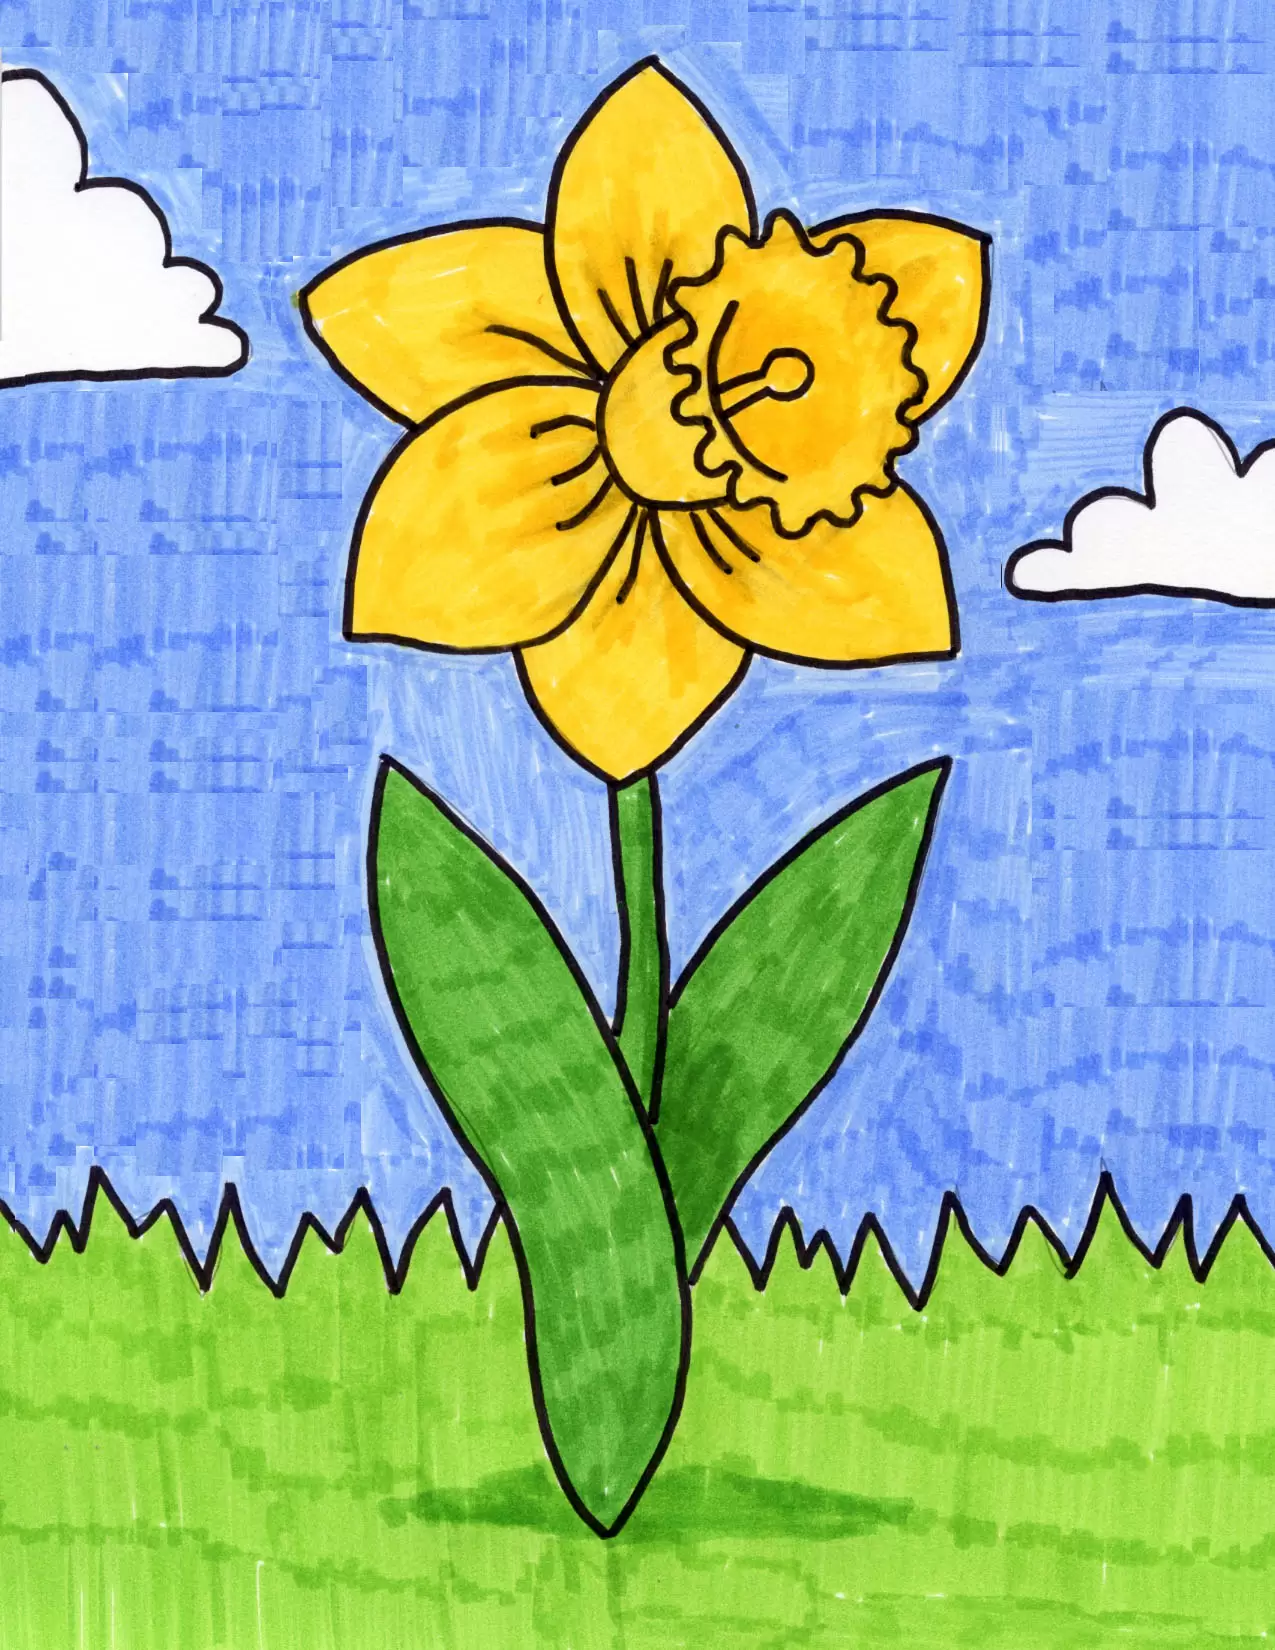 Easy How to Draw a Daffodil Tutorial and Daffodil Coloring Page